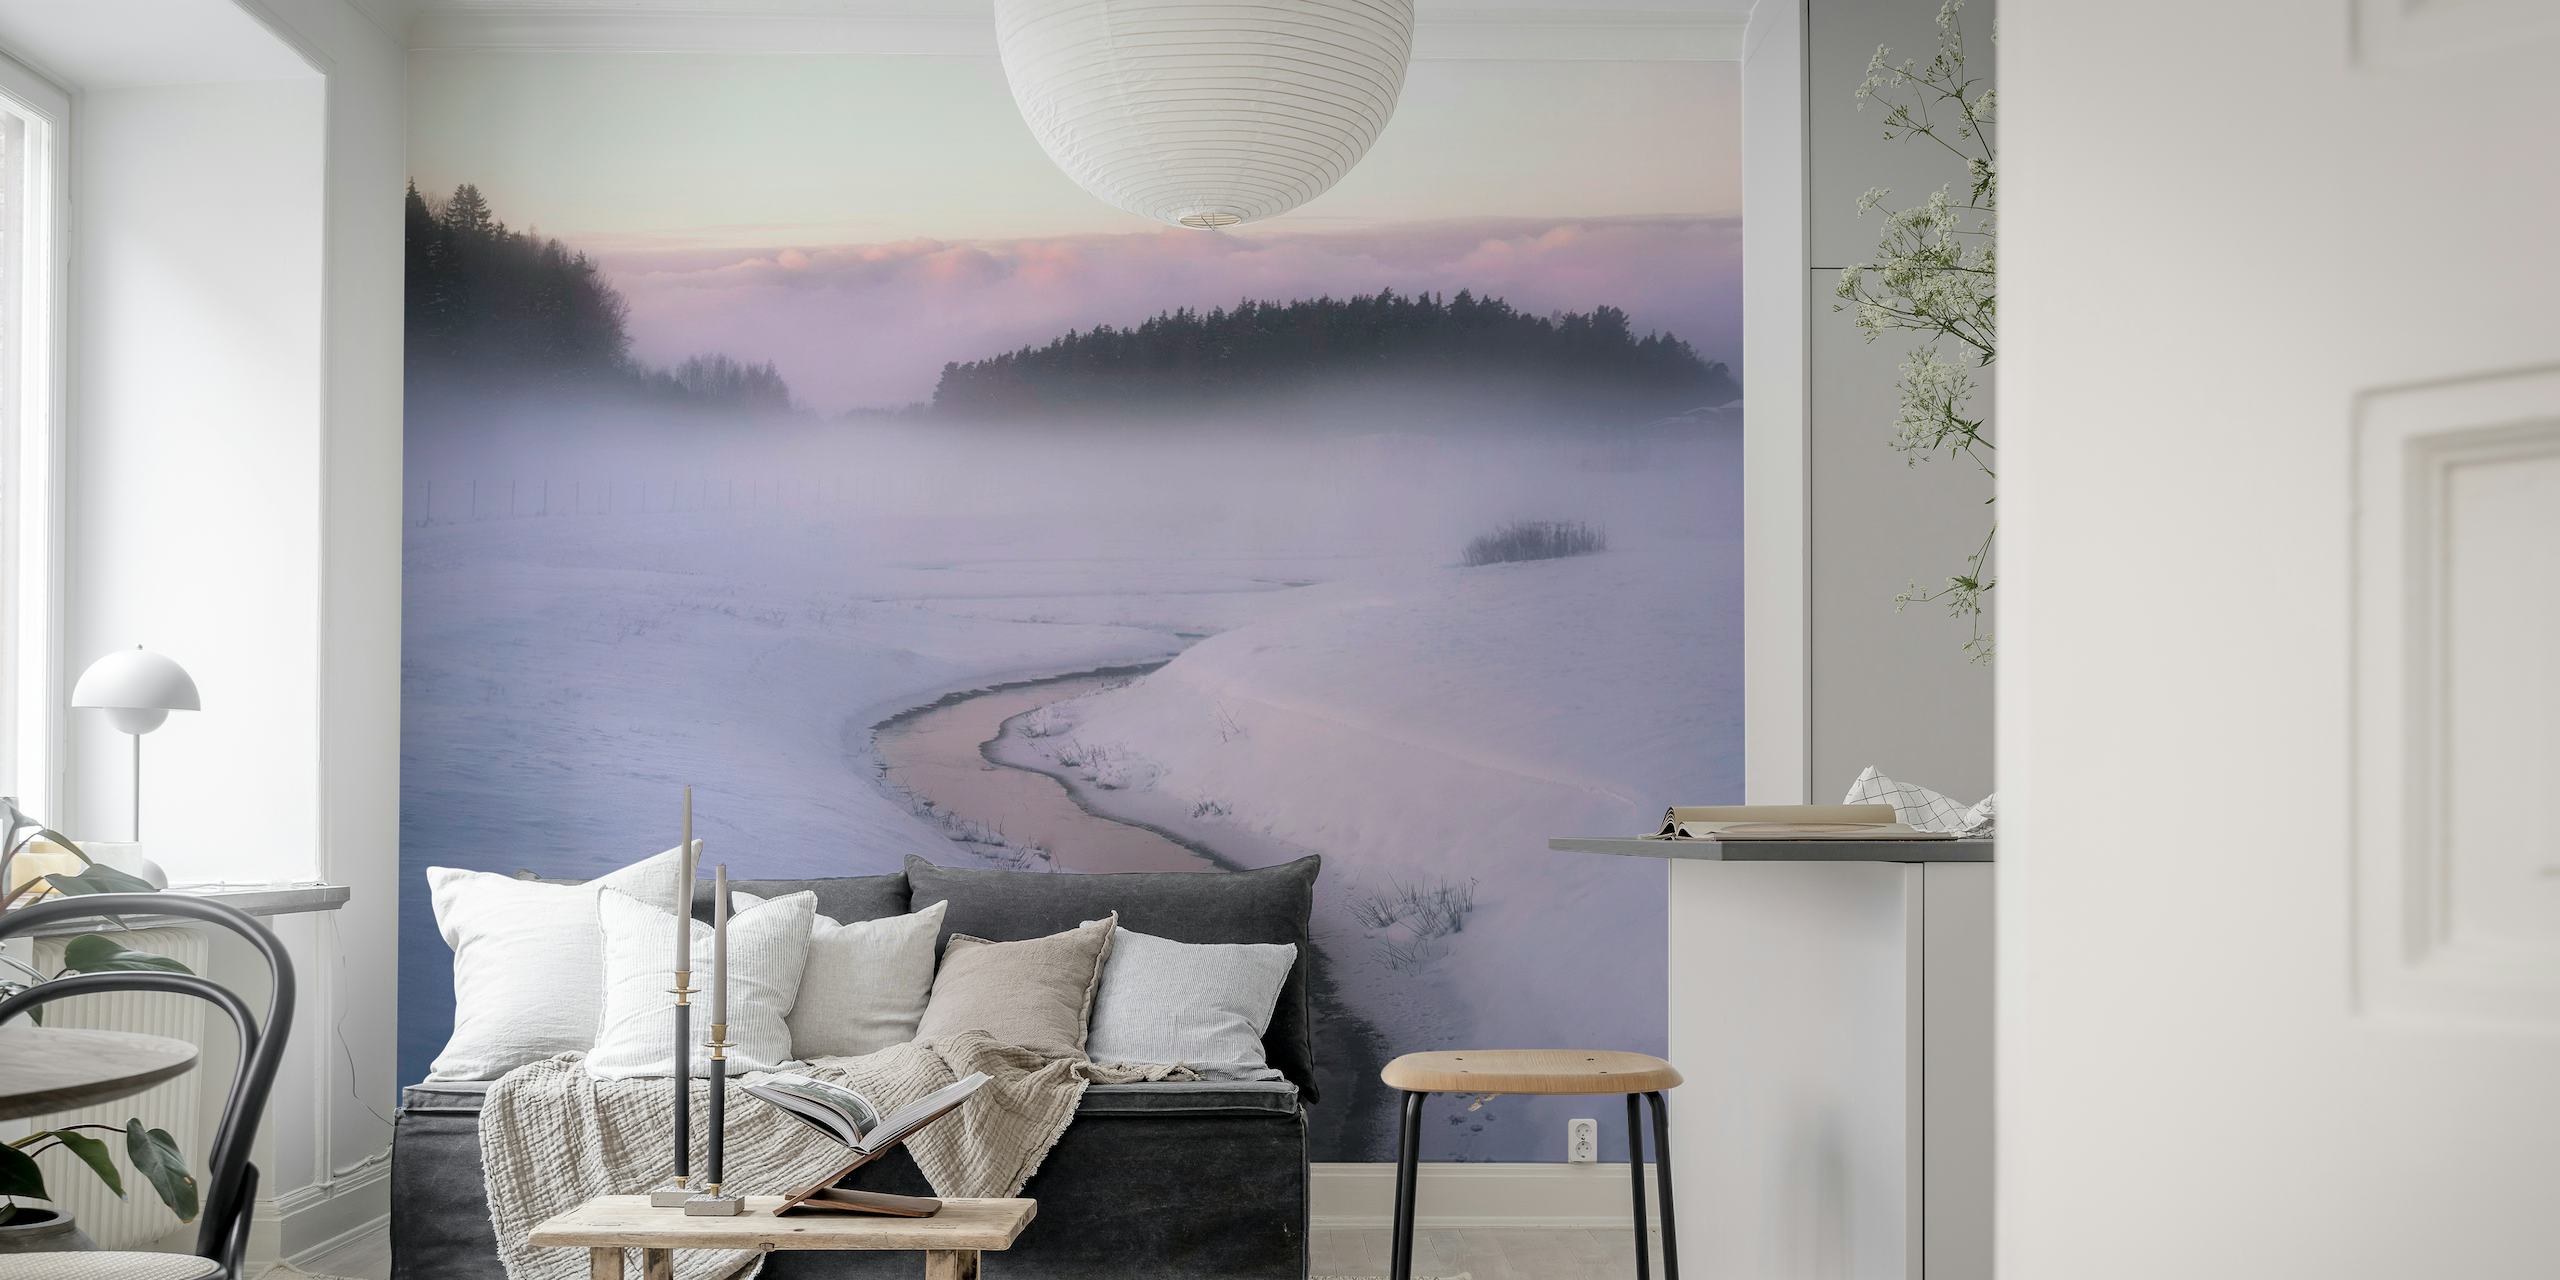 Winter's Mystique wall mural with a snowy landscape and misty forest at dawn